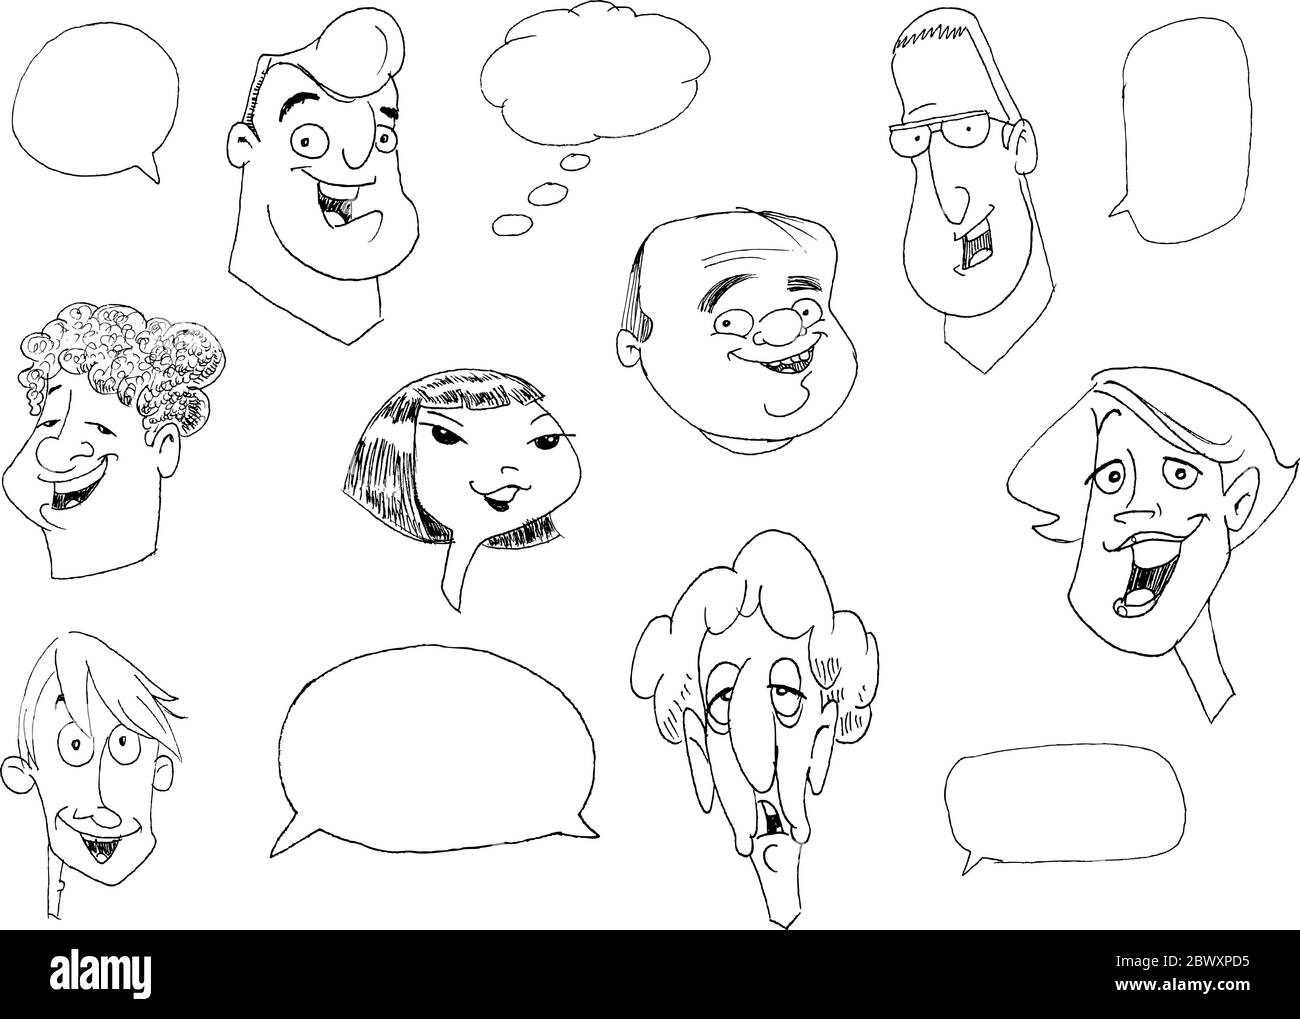 how to draw cartoon faces of people